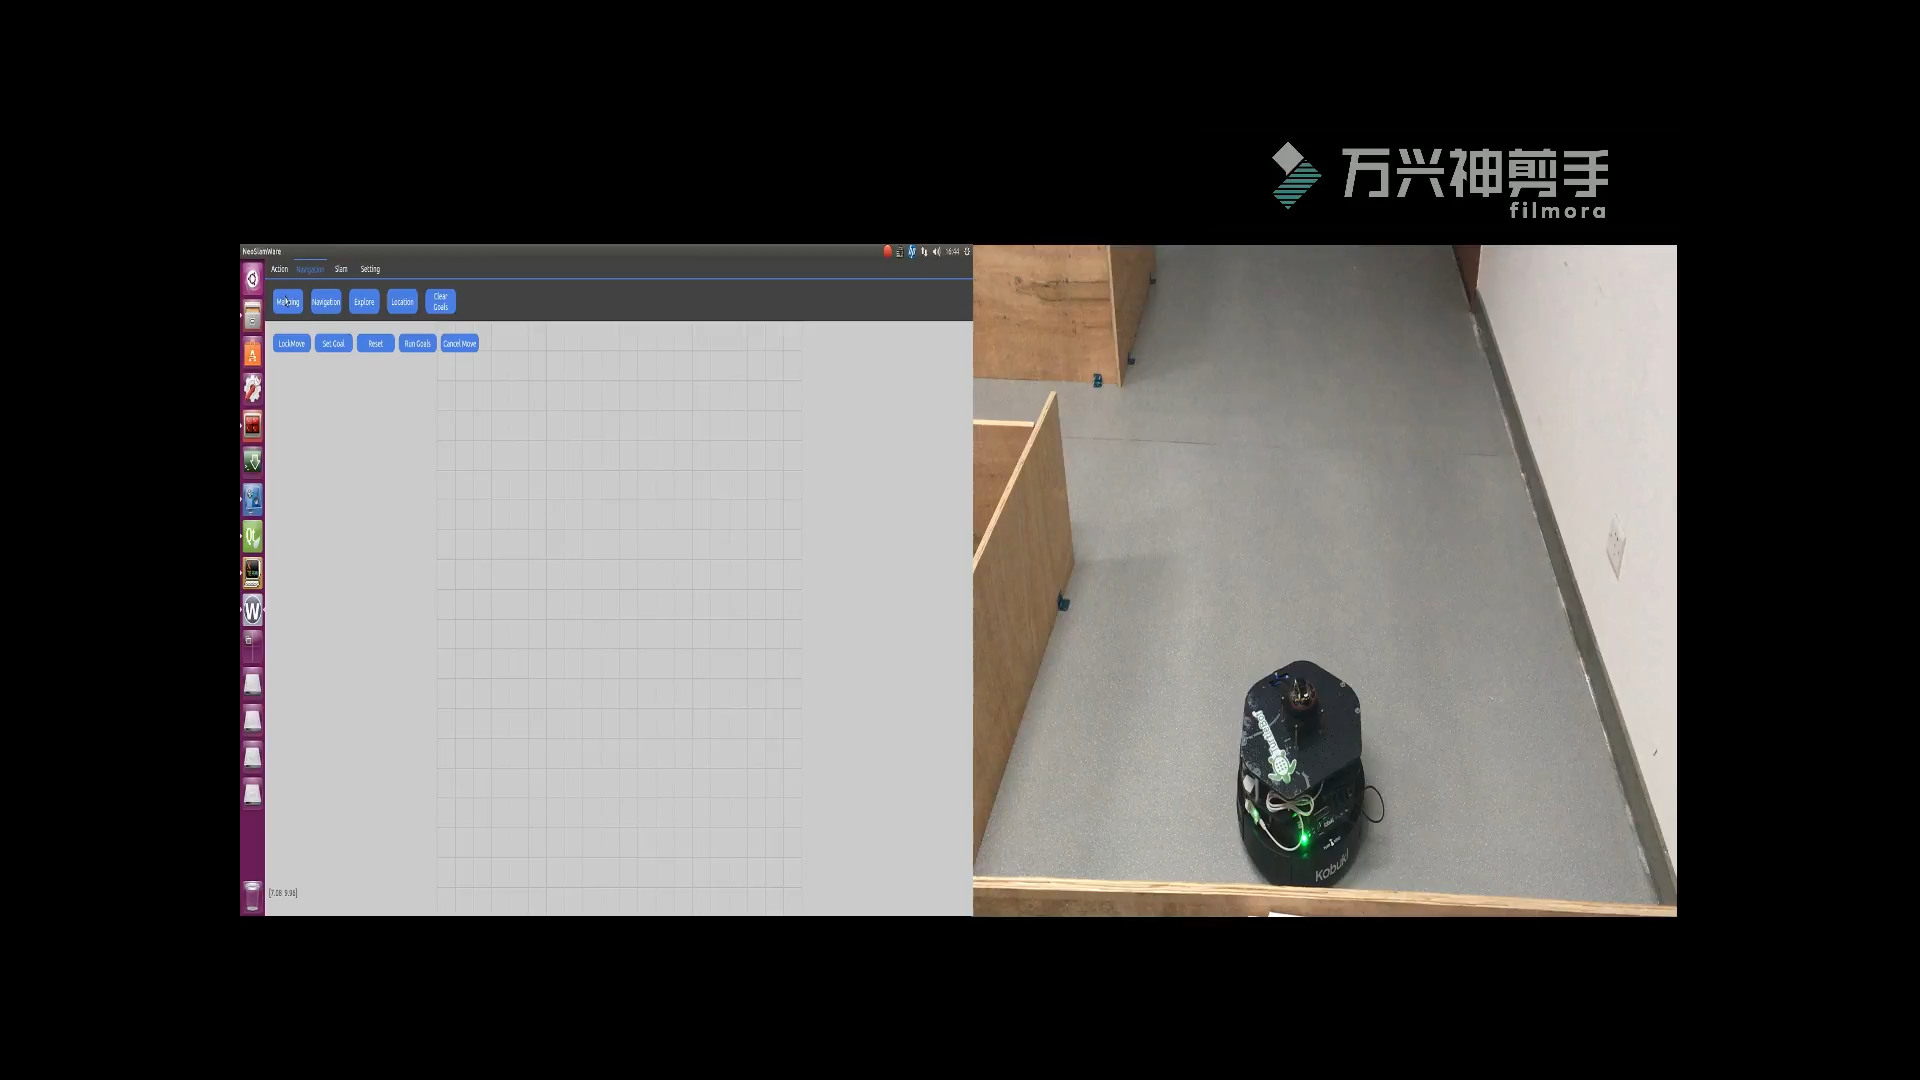 The Robot automatically explore the whole lab